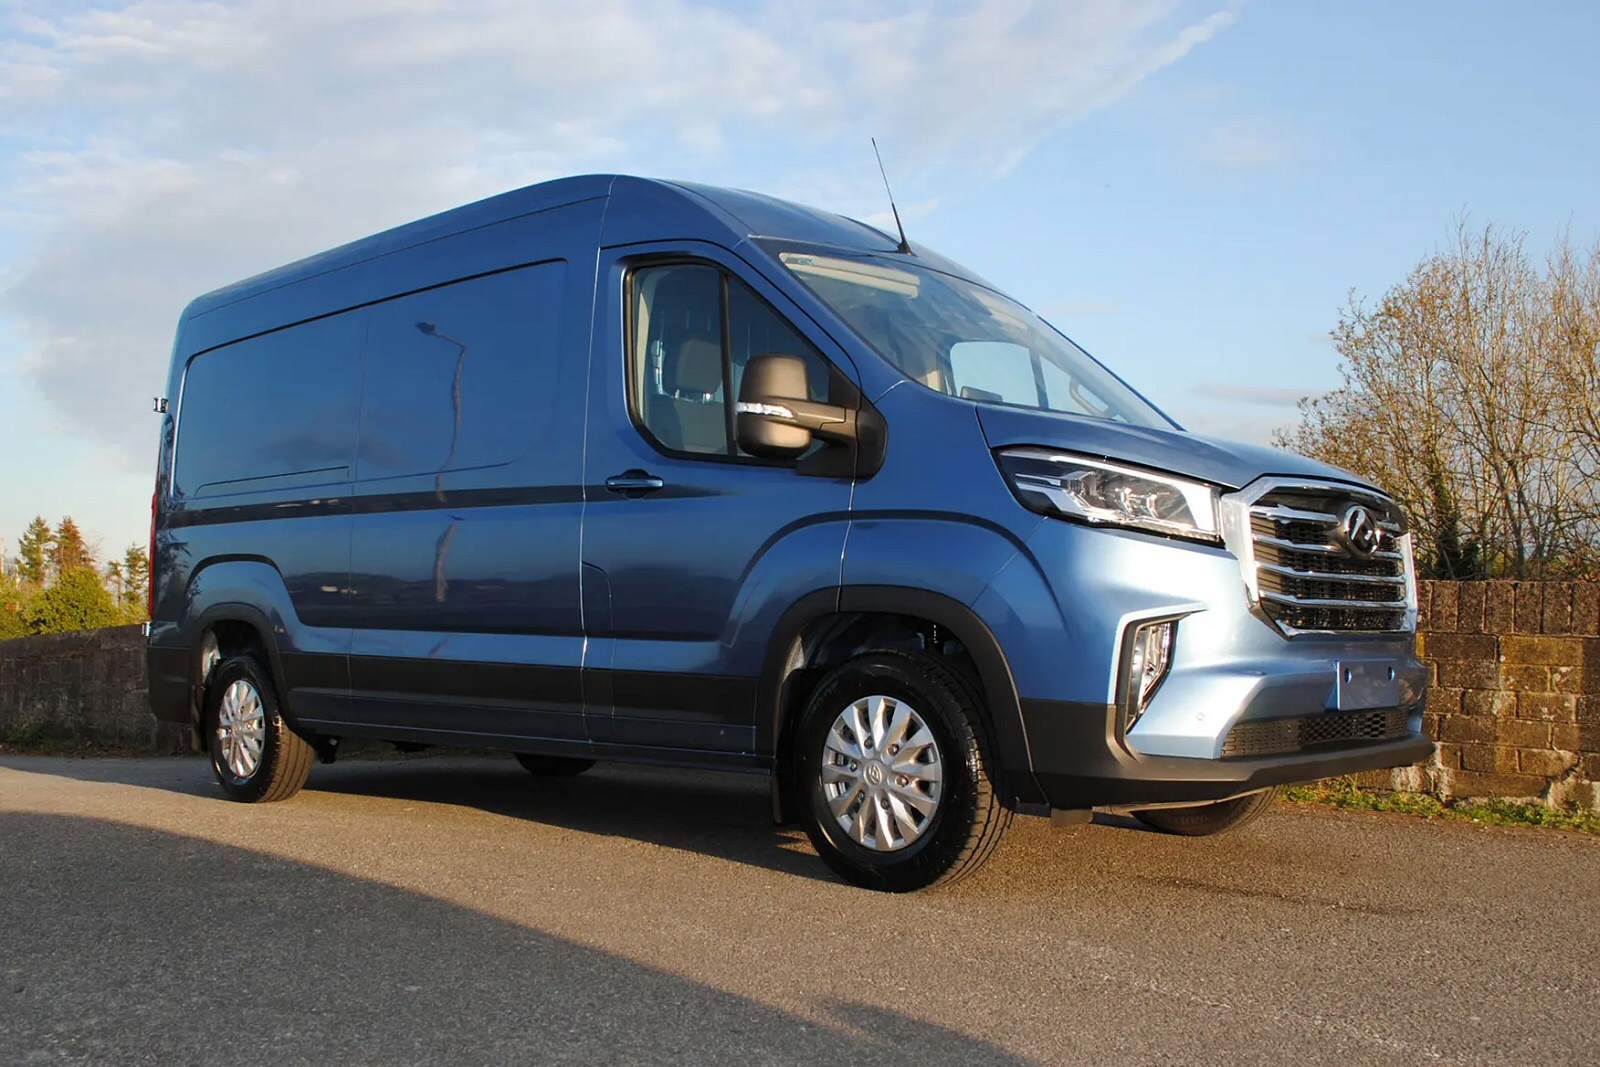 MAXUS E DELIVER 9 LWB ELECTRIC FWD 150kW High Roof Crew Van 72kWh Auto